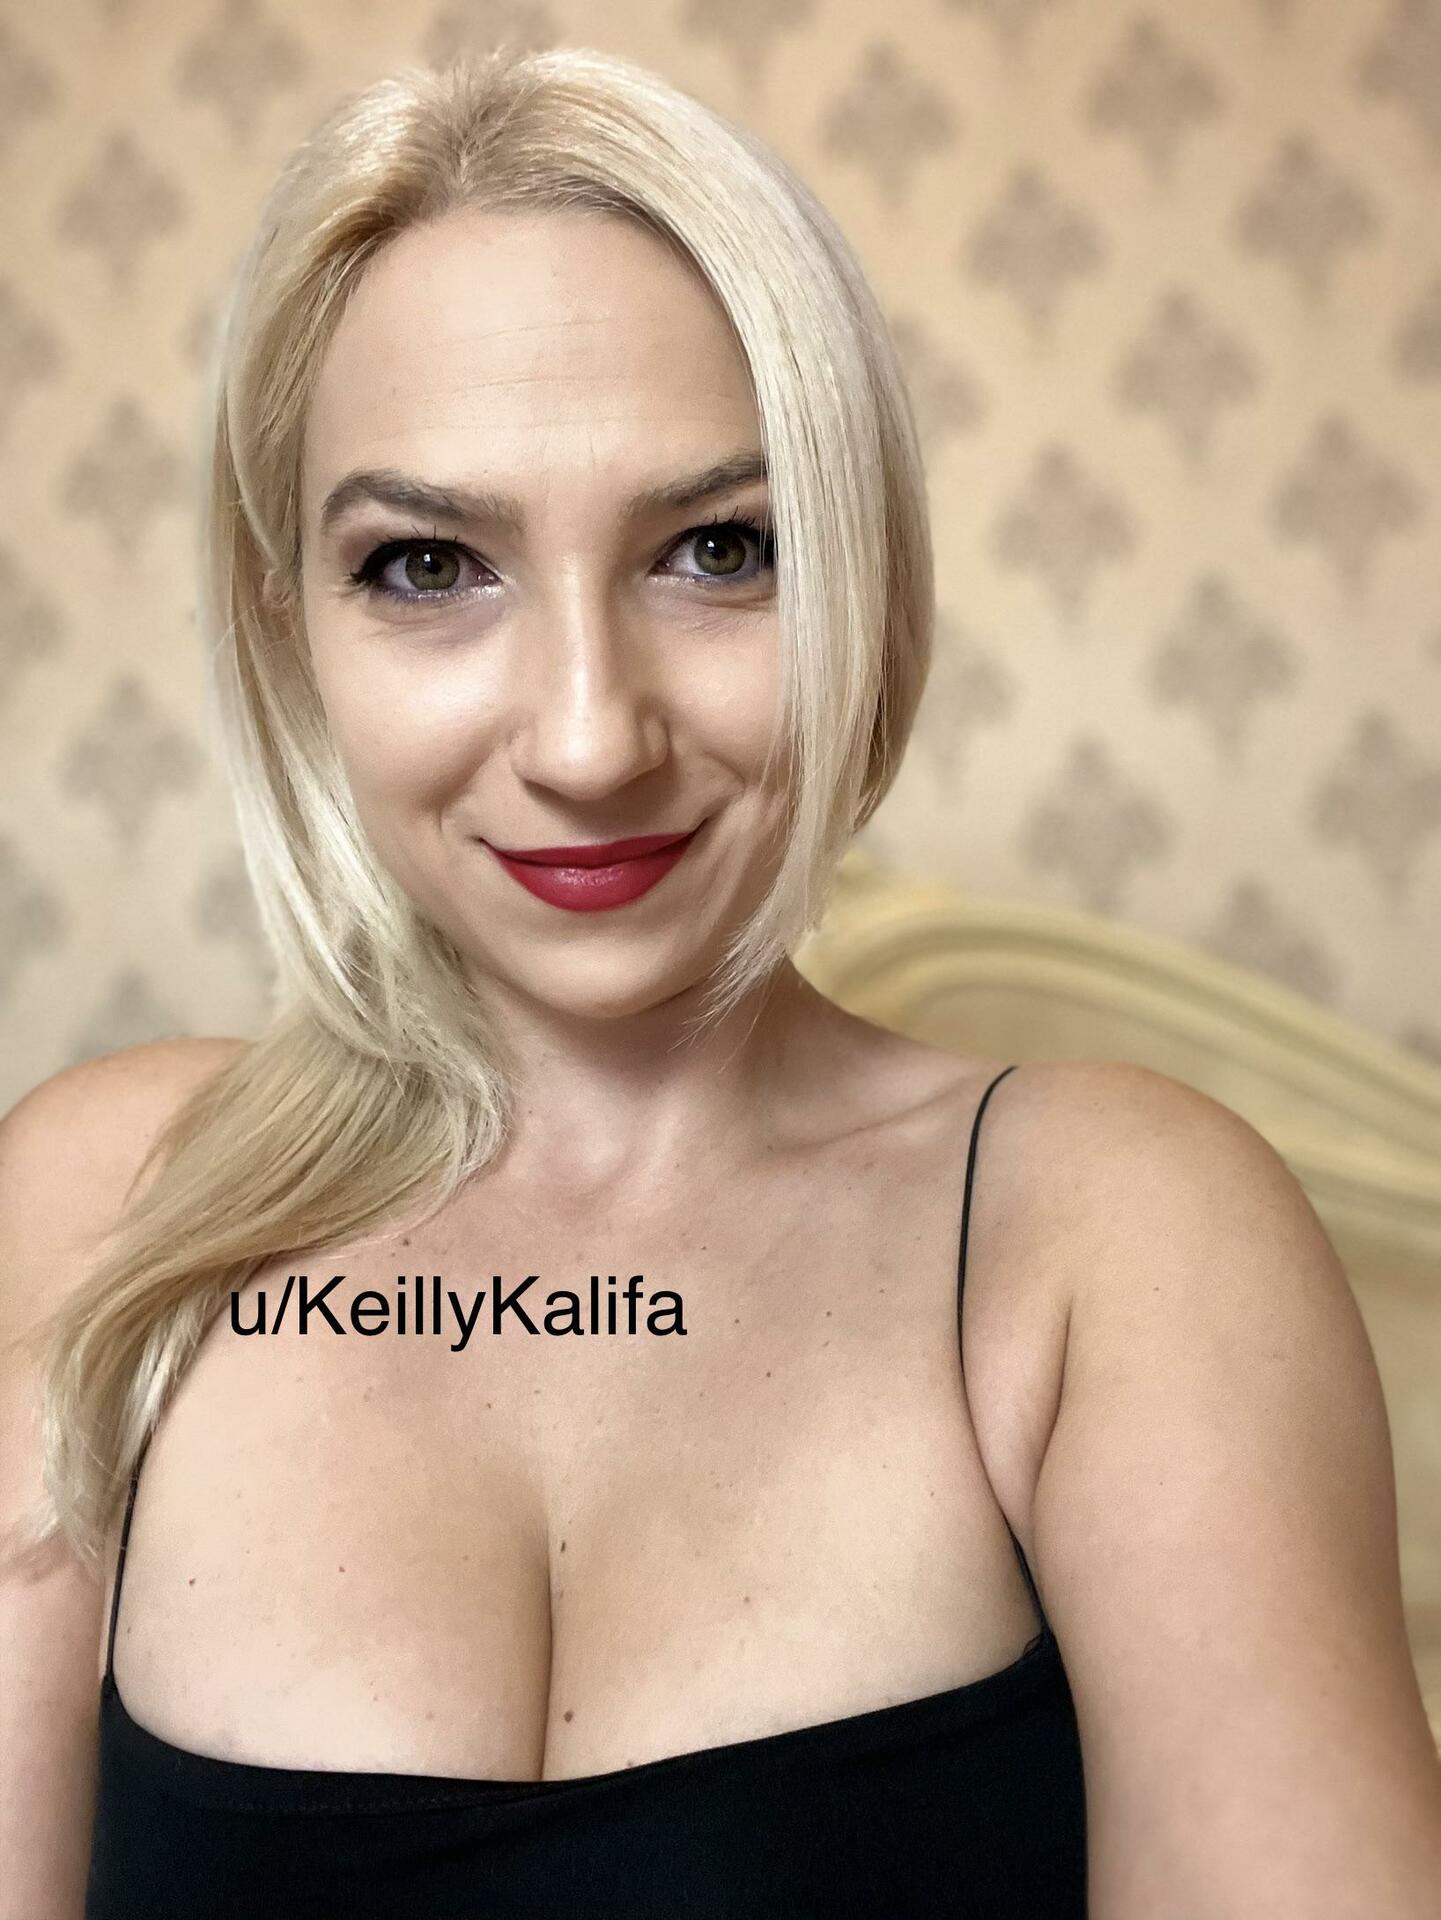 Keillykalifa Nude Onlyfans Leaks 24 Photos Thefappening